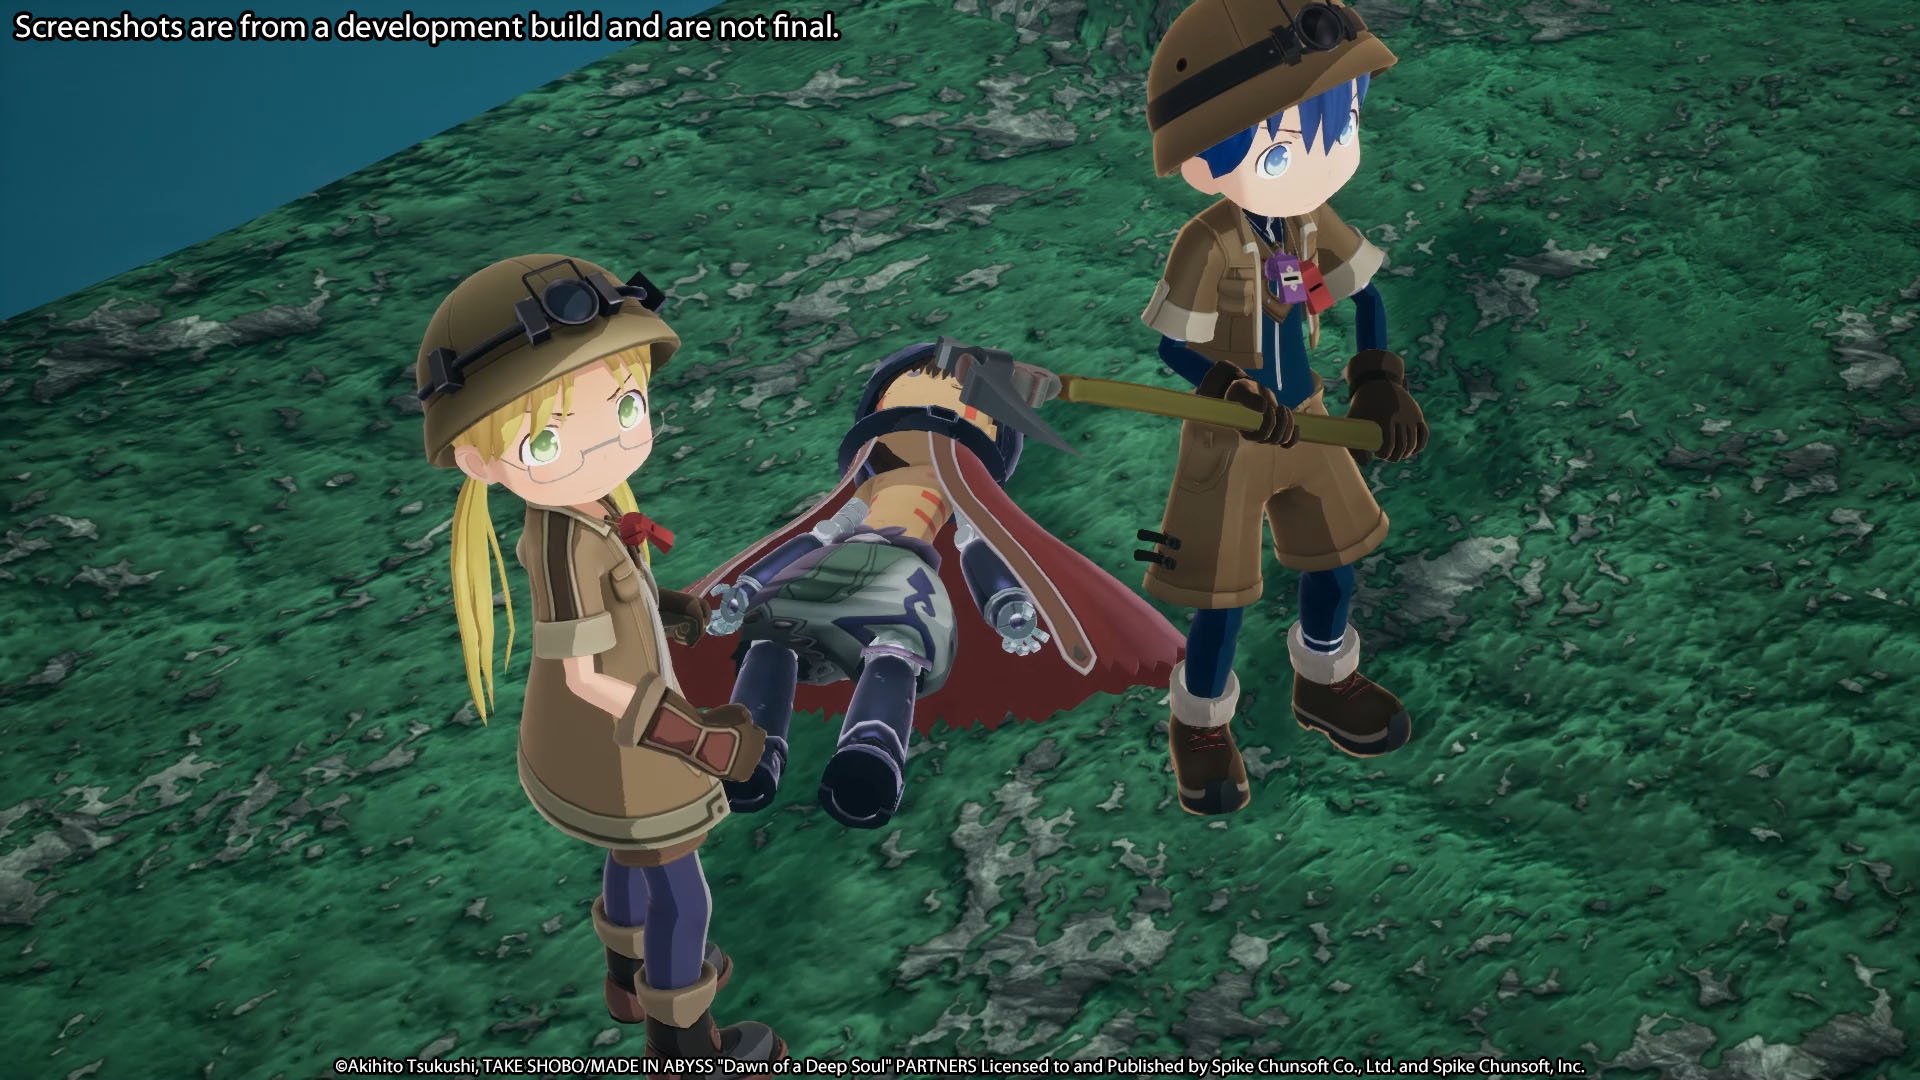 Made in Abyss: Binary Star Falling into Darkness 'Game Overview